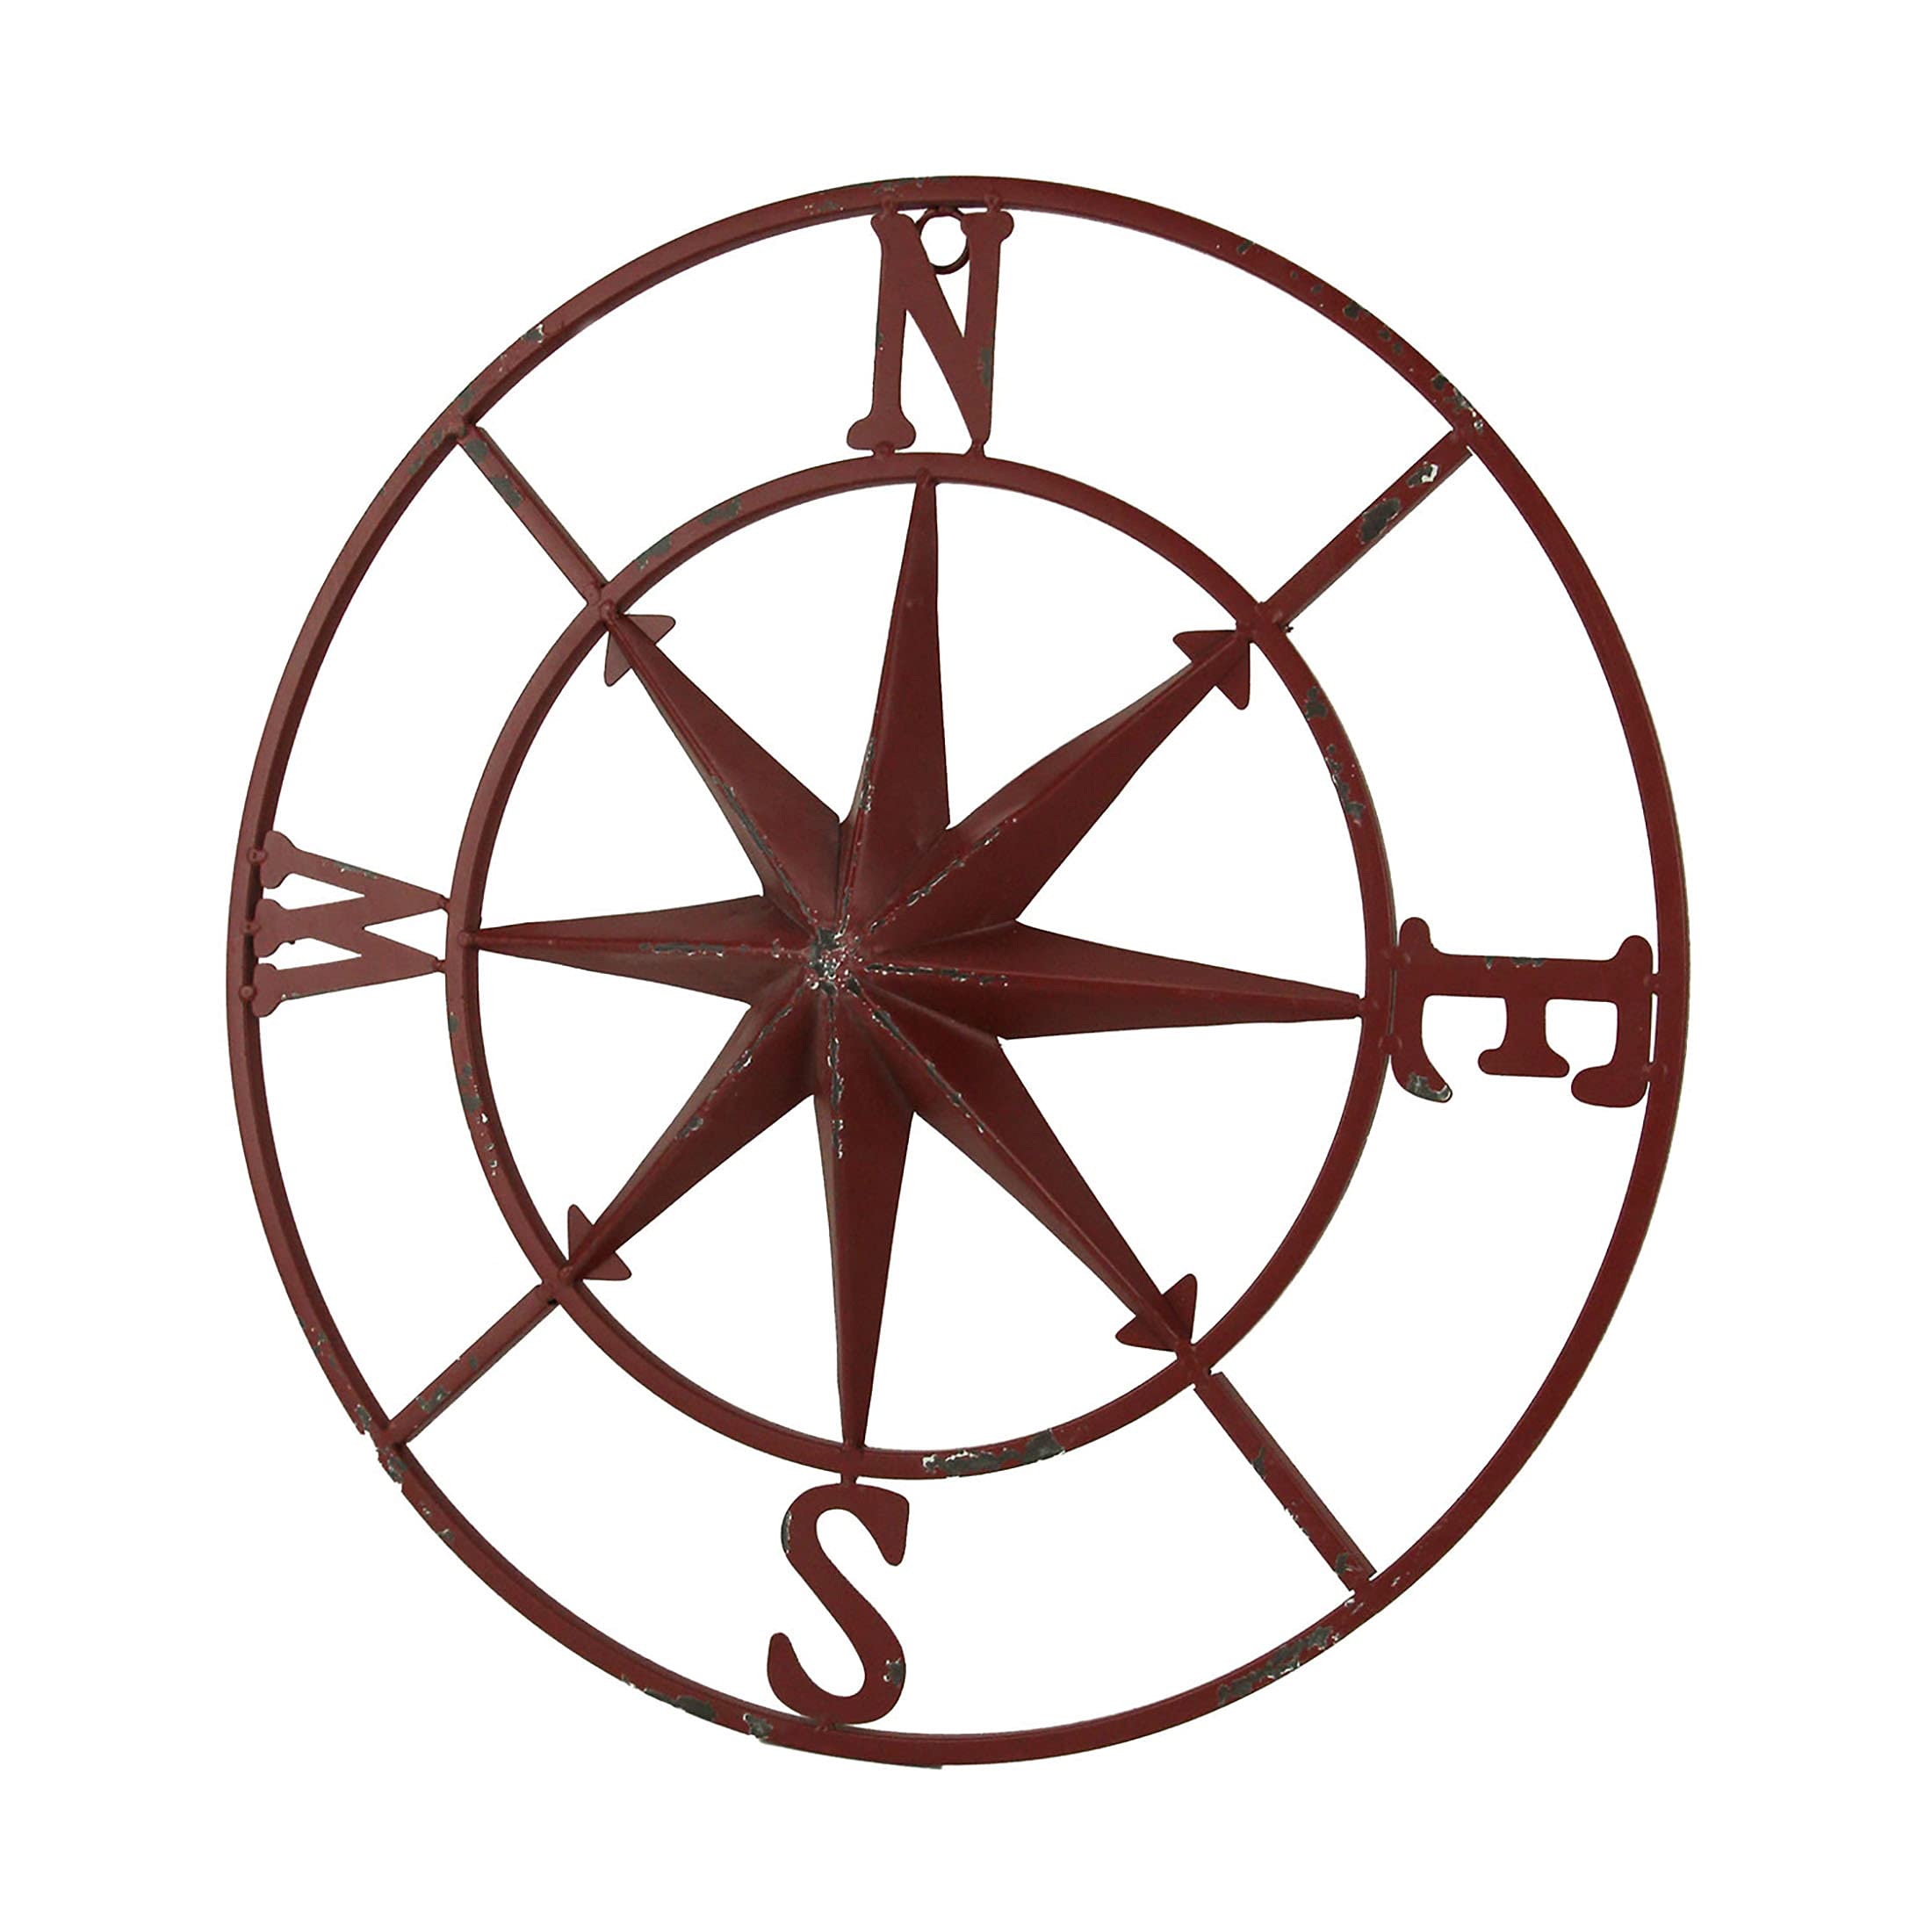 PD Home & Garden Distressed Metal Nautical Compass Rose Indoor/Outdoor Wall Hanging - Red